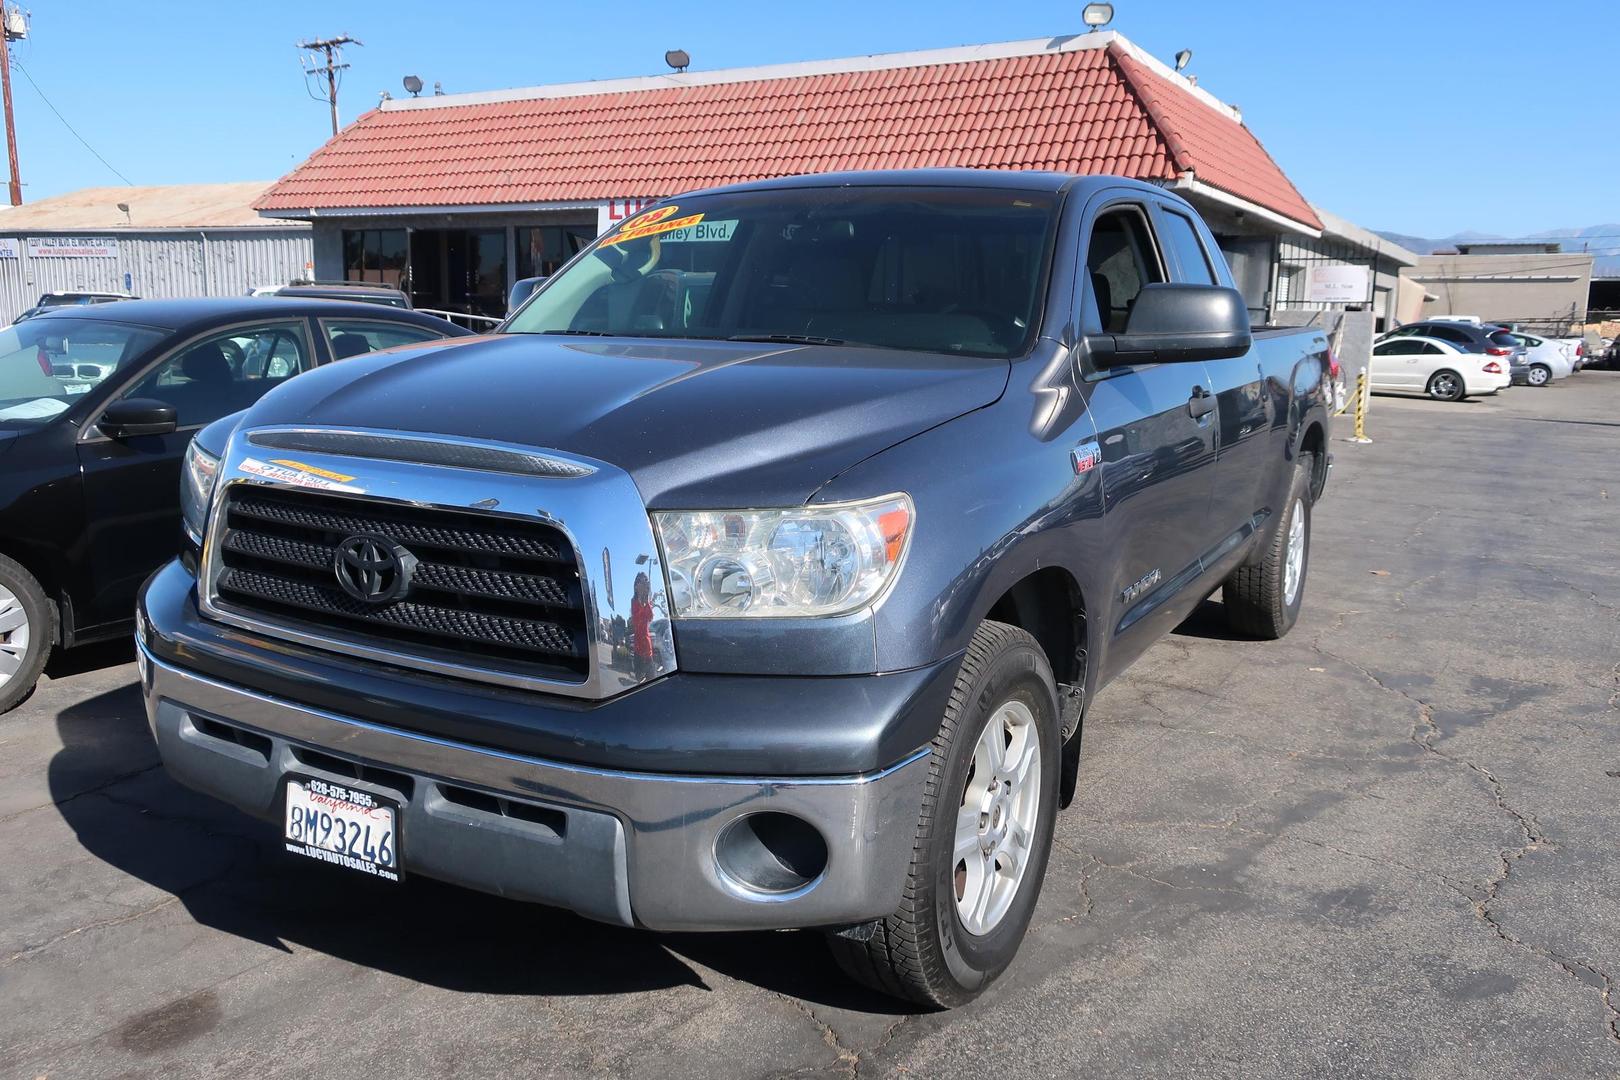 USED TOYOTA TUNDRA DOUBLE CAB 2008 for sale in El Monte, CA | Lucy Auto